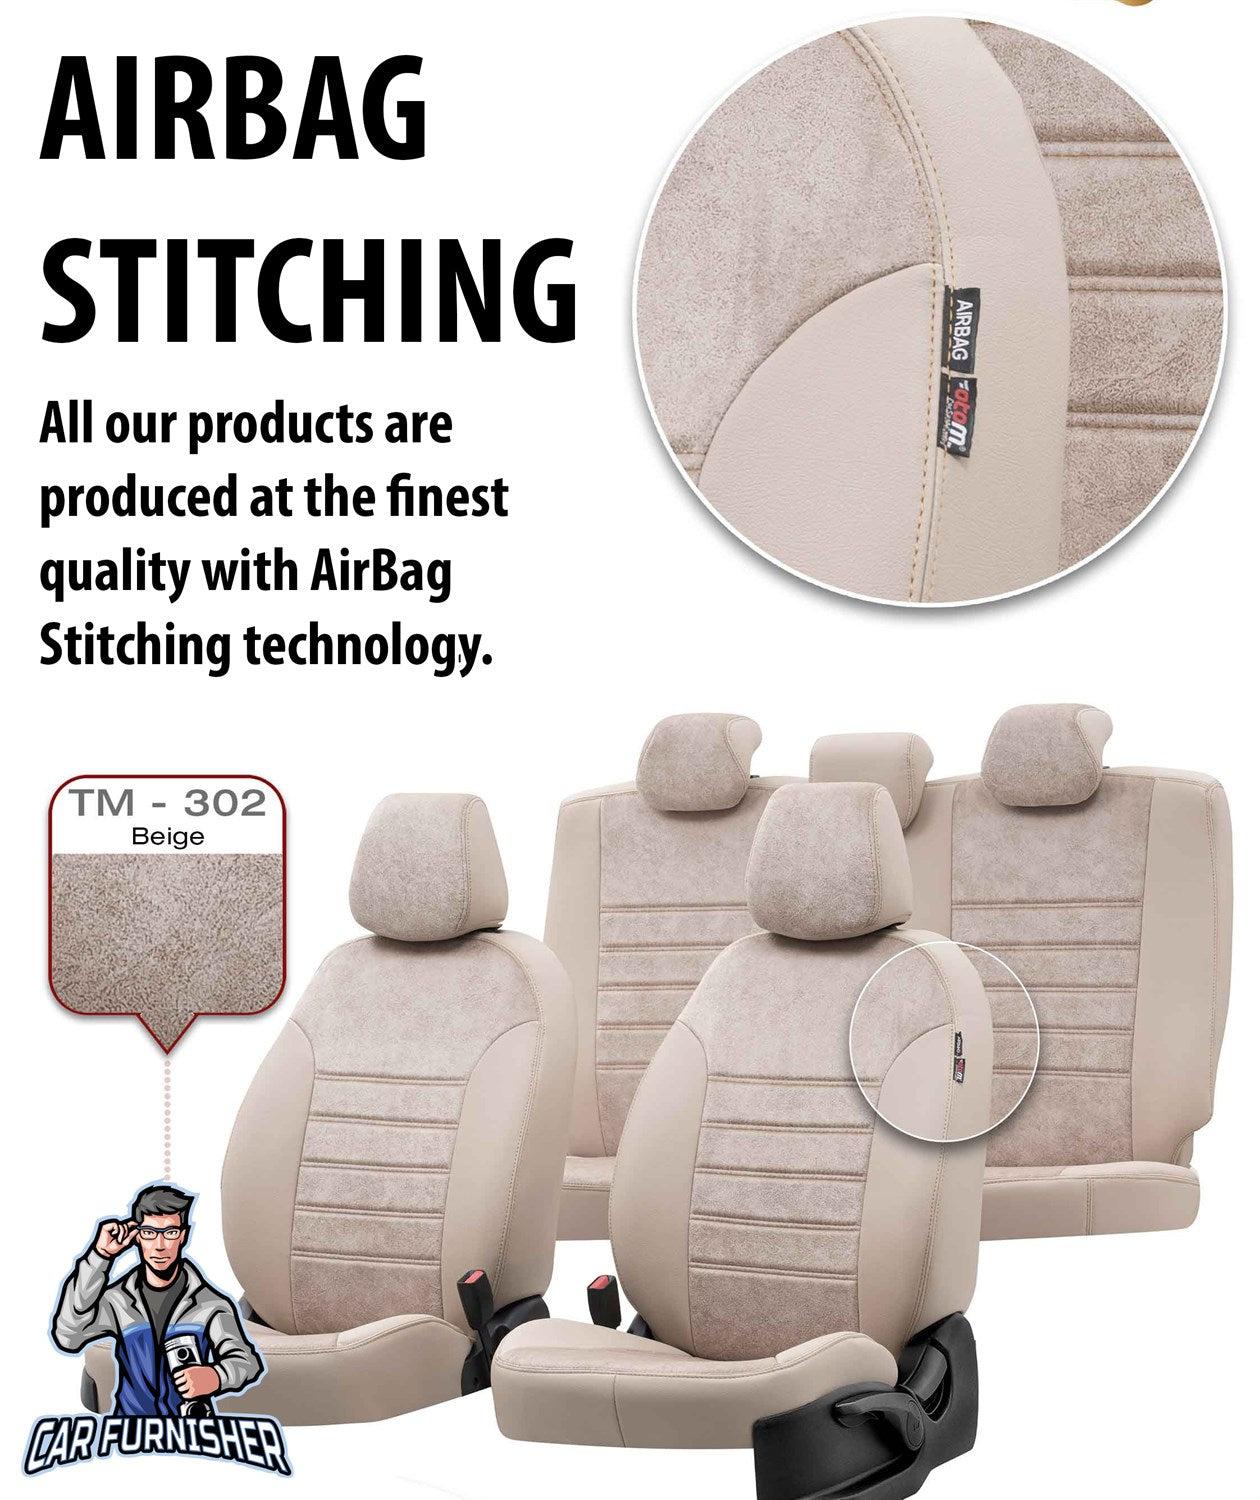 Mitsubishi L-300 Seat Covers Milano Suede Design Burgundy Leather & Suede Fabric